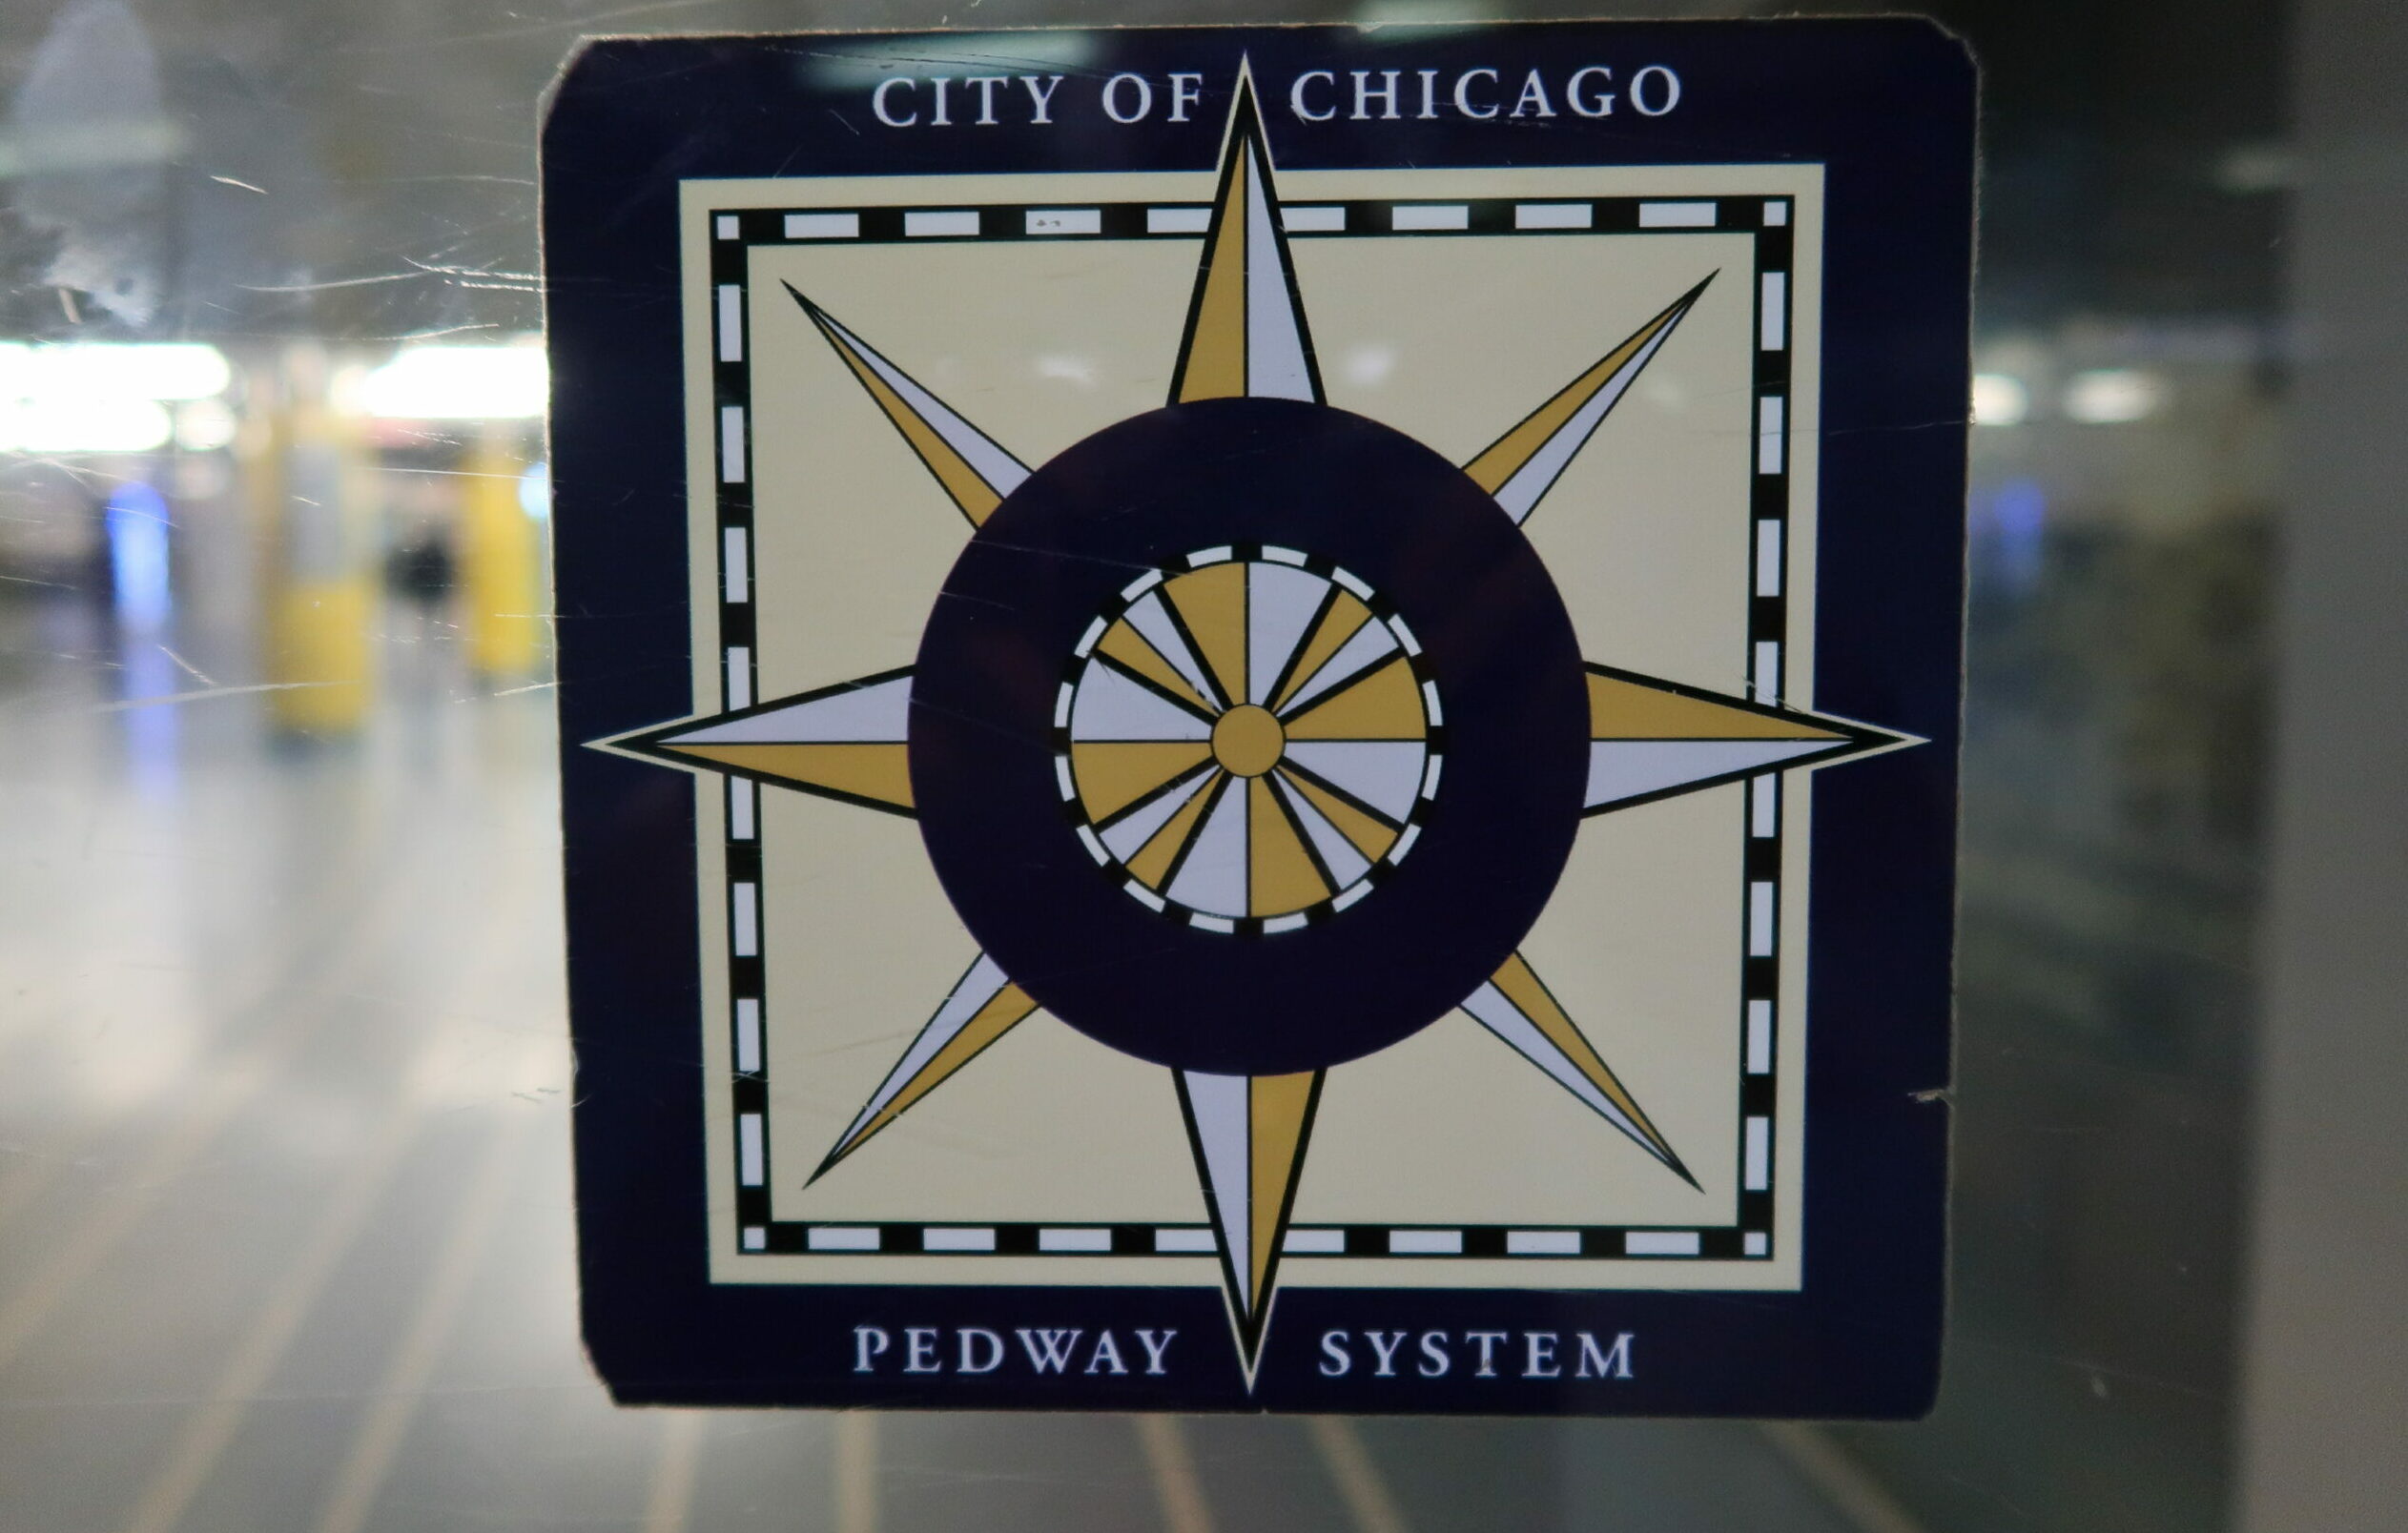 City of Chicago Pedway System compass sign